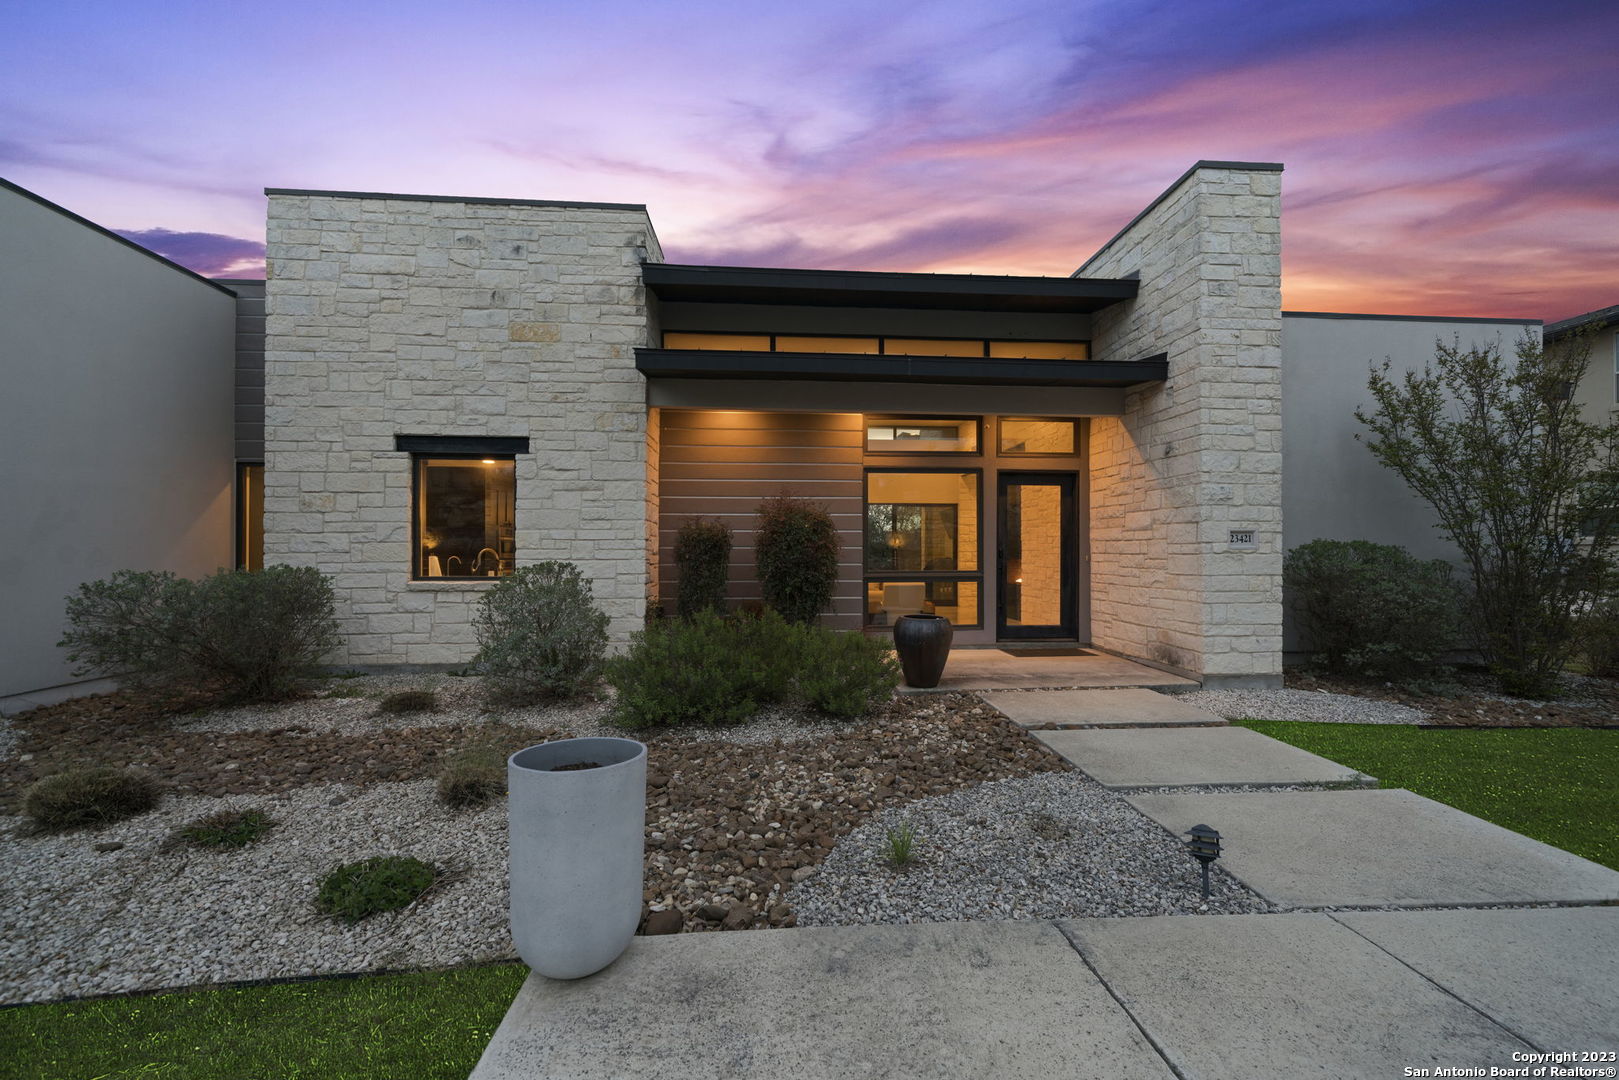 Welcome to this stunning contemporary home built by Adam Wilson, featuring 3 bedrooms and 3 bathrooms and a half bath, located in an elevated position that offers breathtaking hill country views.    As you enter the home, you'll immediately notice the 10-foot high ceilings that create an open and spacious feeling throughout the home. The living area is even more impressive with its soaring 14-foot high ceiling, which is sure to impress anyone who walks in. The room is bathed in natural light thanks to the floor-to-ceiling windows and sliding doors that lead to the backyard, where you can enjoy the beautiful scenery.    The gourmet kitchen is a chef's dream, featuring top-of-the-line appliances, custom cabinets, and a long oversized island that's perfect for entertaining guests or just relaxing with family. The kitchen also has plenty of storage space, so you'll never have to worry about clutter.    The master bedroom is a luxurious retreat with a sitting area, his and her closets and large windows that offer stunning views of the hill country. The master bathroom is equally impressive, featuring his and hers toilets and vanities, as well as an incredible shower with several heads that will make you feel like you're in a spa.  The concrete floors throughout are easy to maintain and extremely durable.  As you stroll through the home you'll find two en-suite bedrooms which are perfect for the privacy of your guest. There's an additional living space to relax, watch TV or play your video games.  The landscaping is truly amazing, with carefully curated plants and trees that perfectly complement the natural beauty of the surrounding hill country. You'll love spending time in the backyard, where you can relax and enjoy the peaceful surroundings with no neighbors behind you.   Overall, this contemporary home is a true masterpiece, built with quality craftsmanship and attention to detail. It's perfect for those who appreciate modern design and love to entertain, and it's sure to impress anyone who steps inside. Don't miss out on this incredible opportunity to own your dream home!